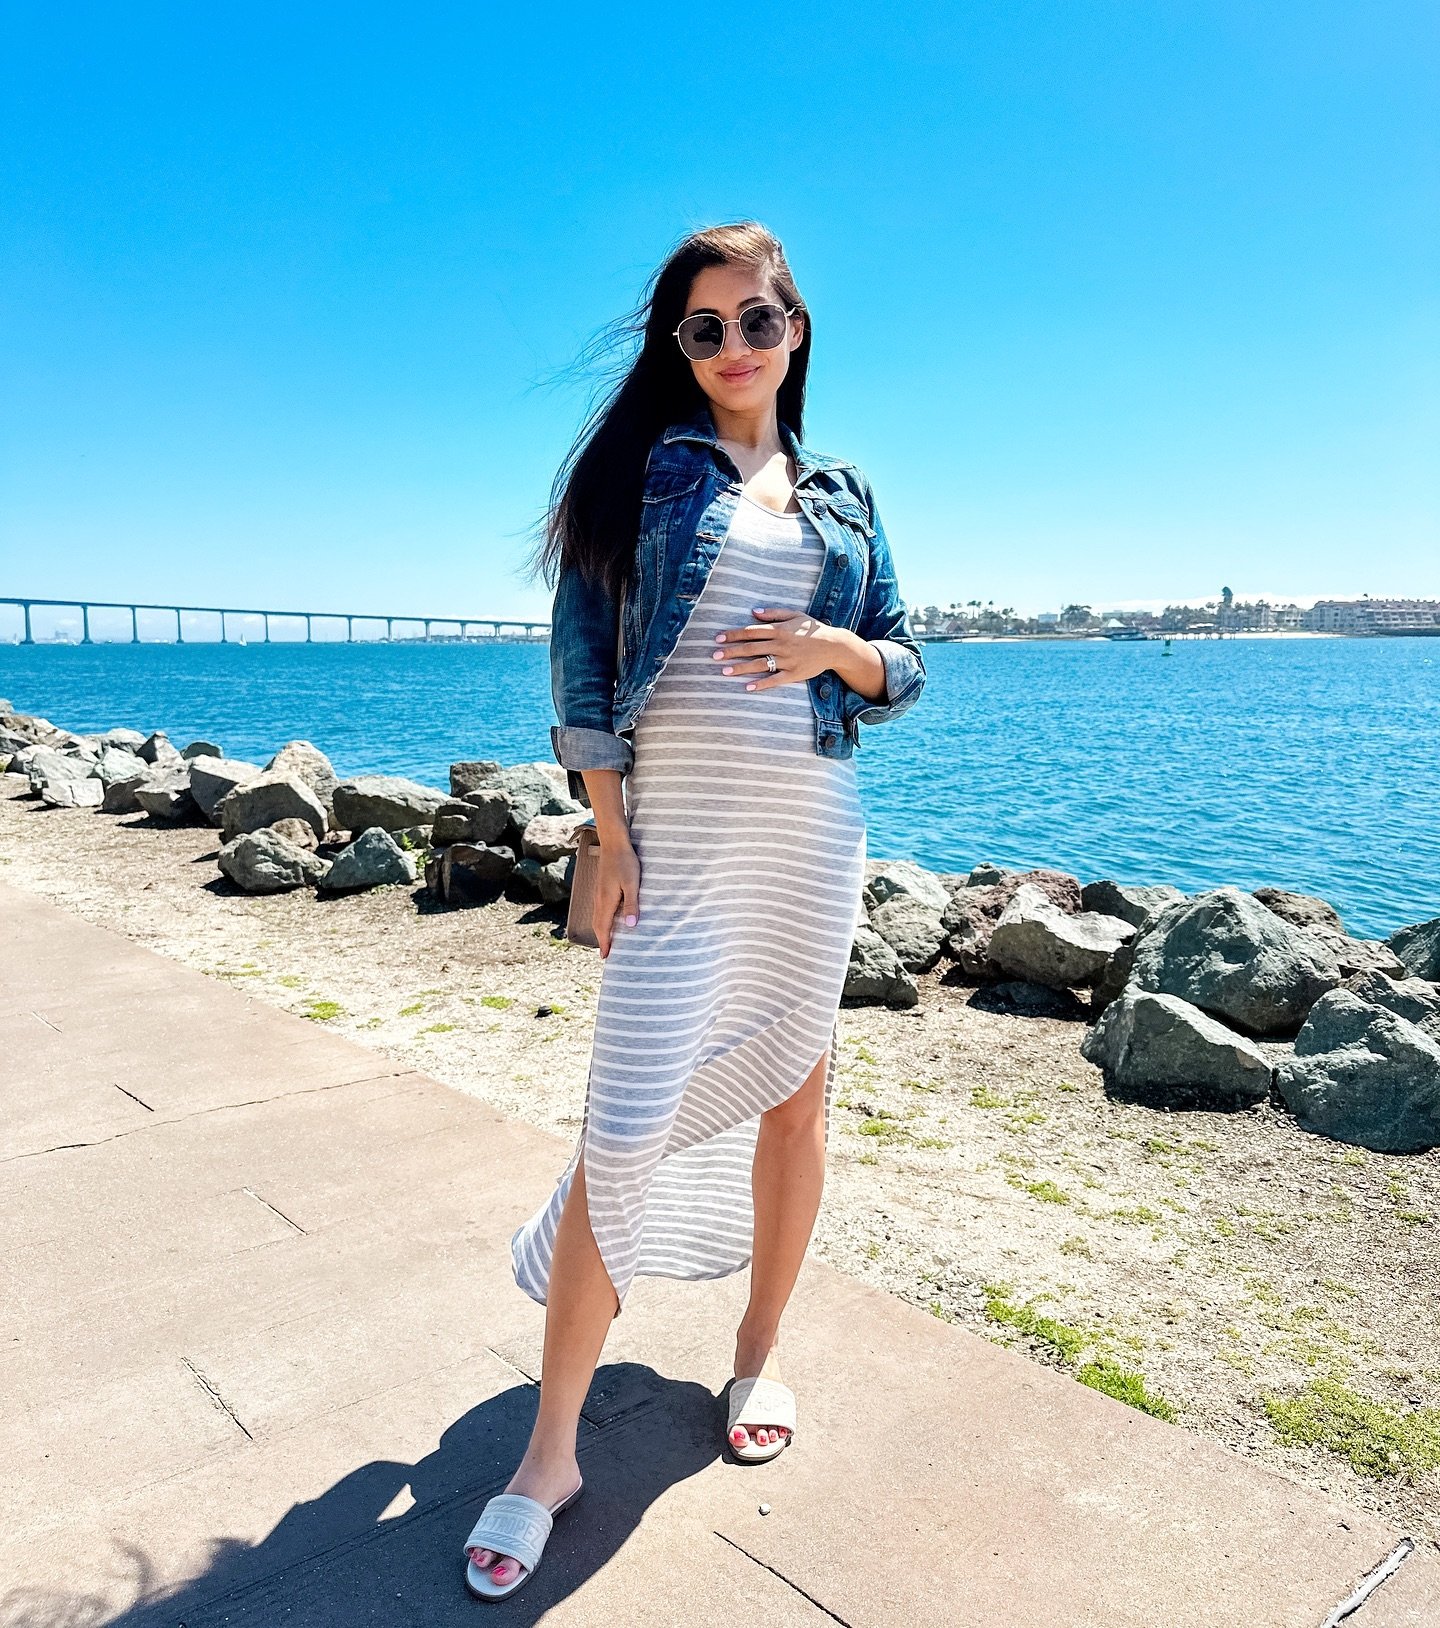 San Diego blues 🌊🤍🩵🤍
Found the comfiest t shirt dress, it&rsquo;s perfect for breezy spring days! Linked everything via my @shop.ltk page! https://liketk.it/4CCYT .
.
#liketkit #LTKbump #ahntheblog #bumpstyle #mystylediary #shopthelook #bumplife 